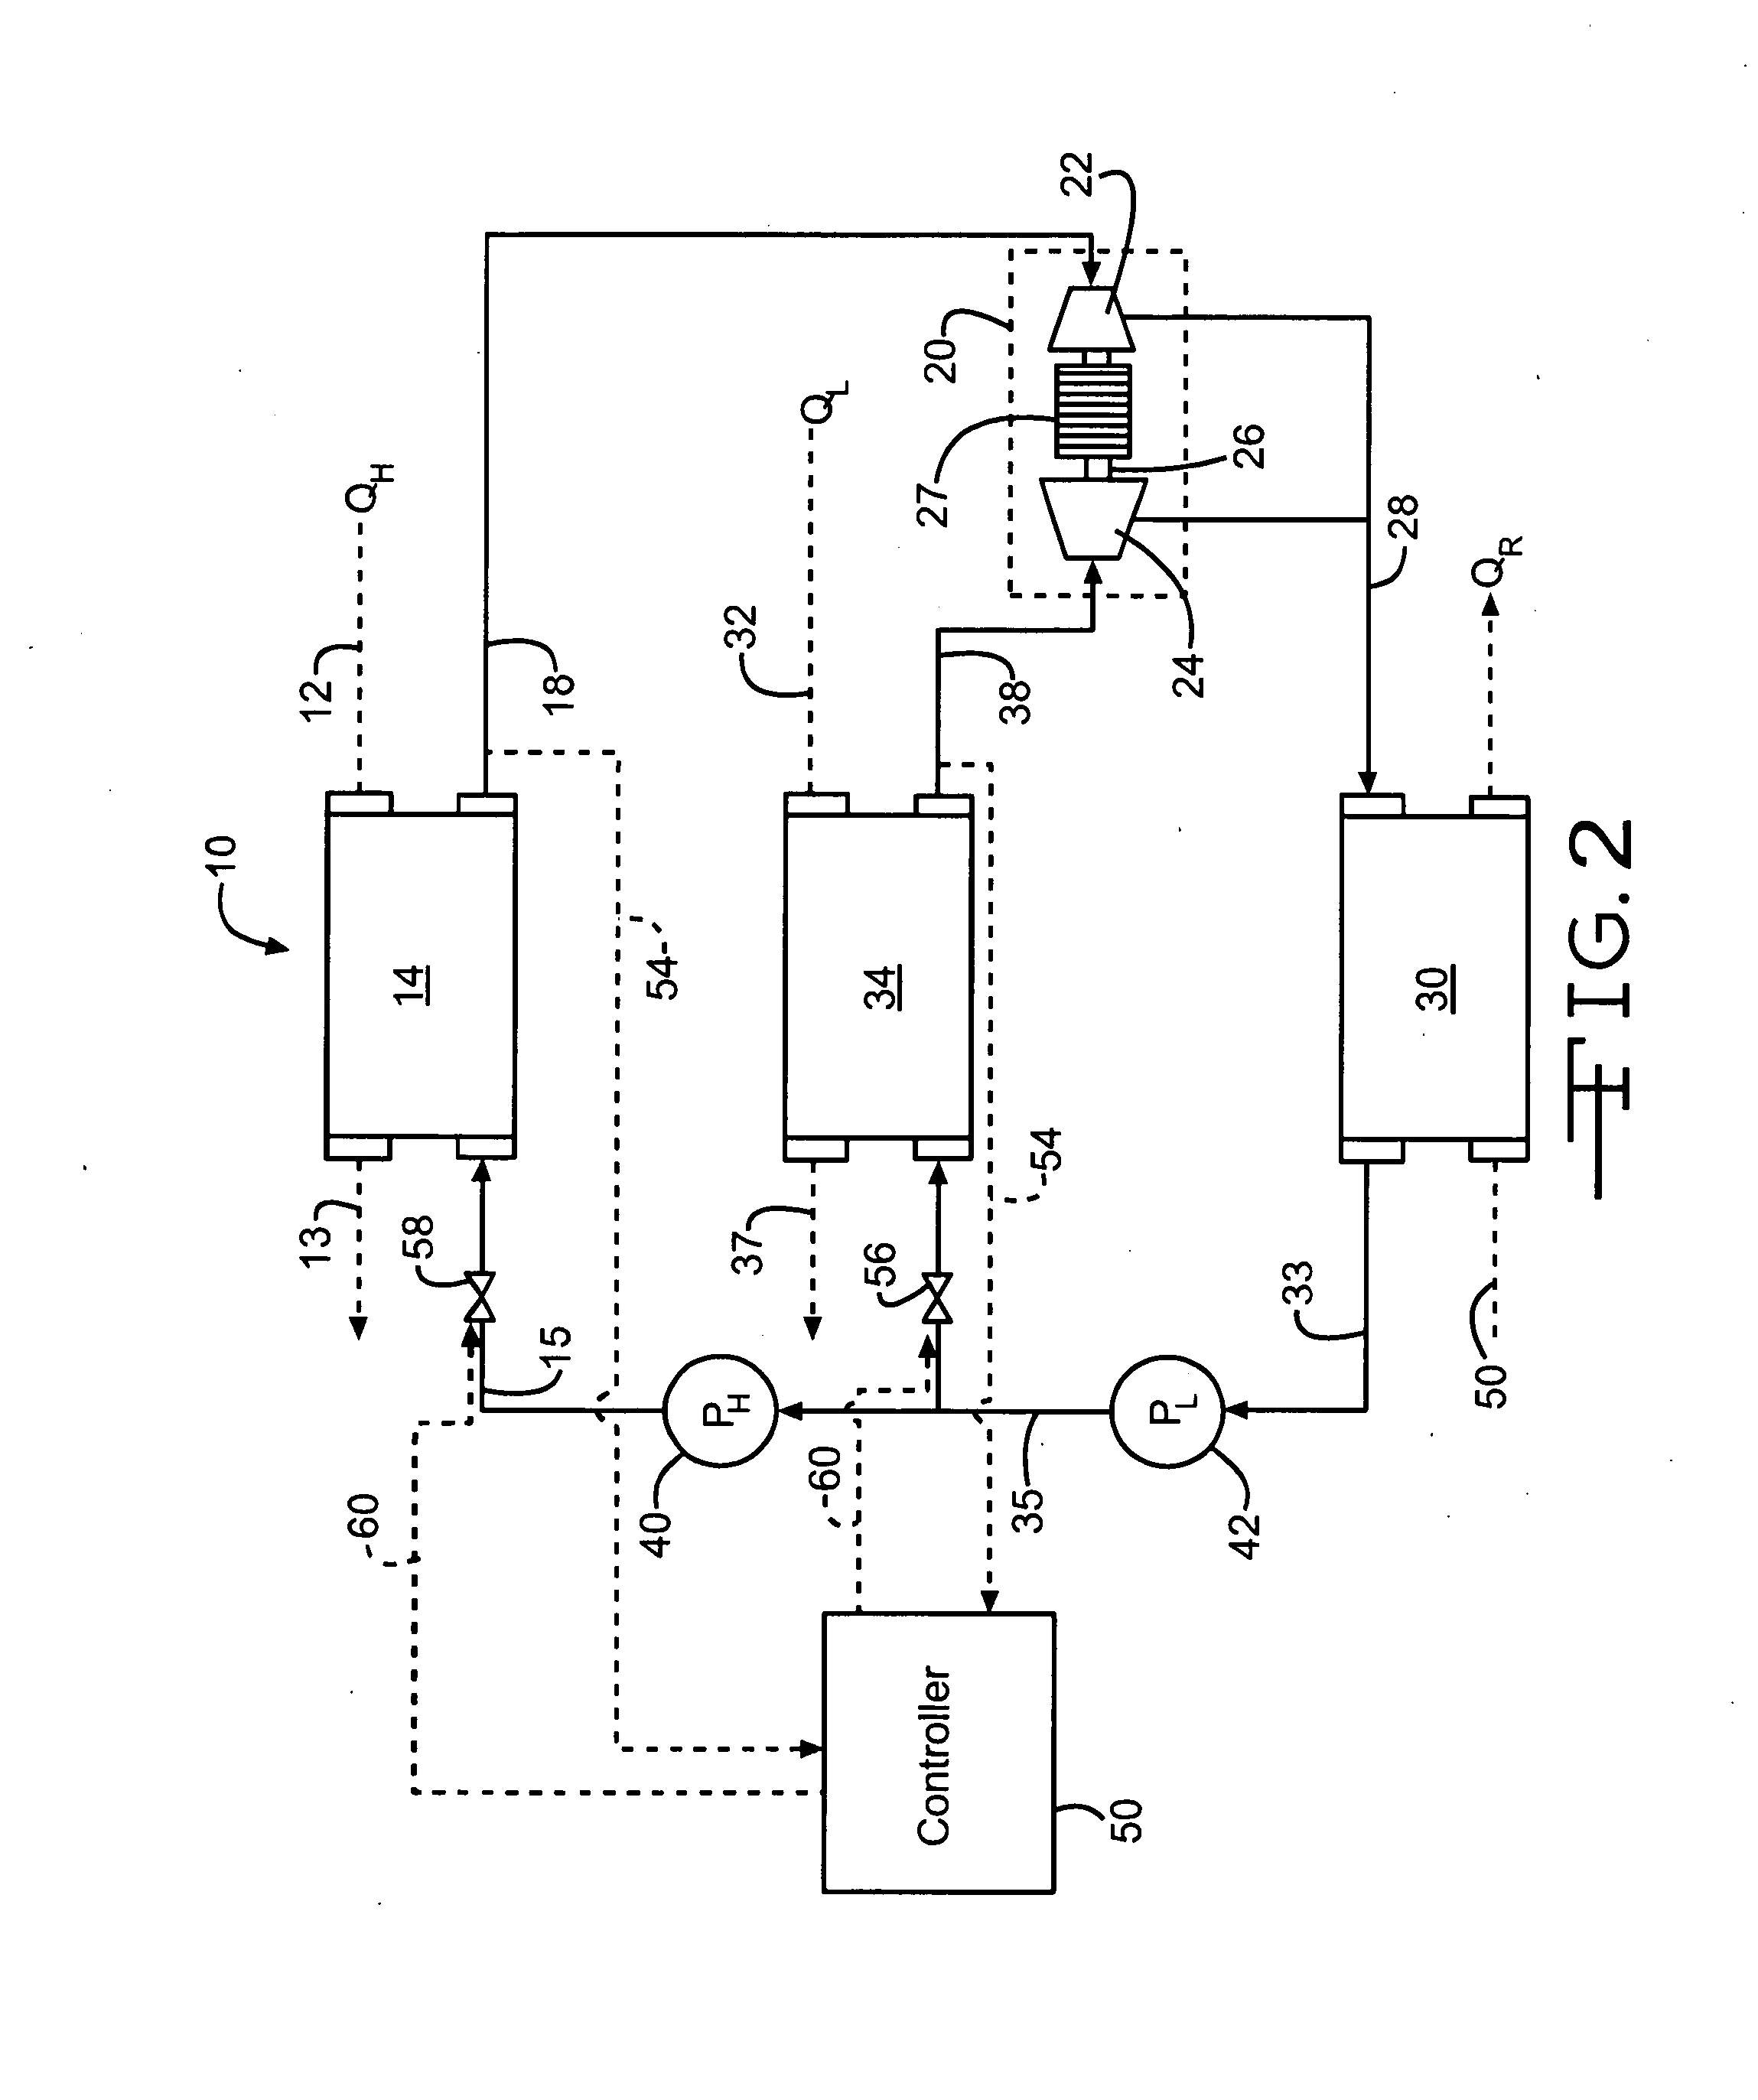 Energy recovery system using an organic rankine cycle